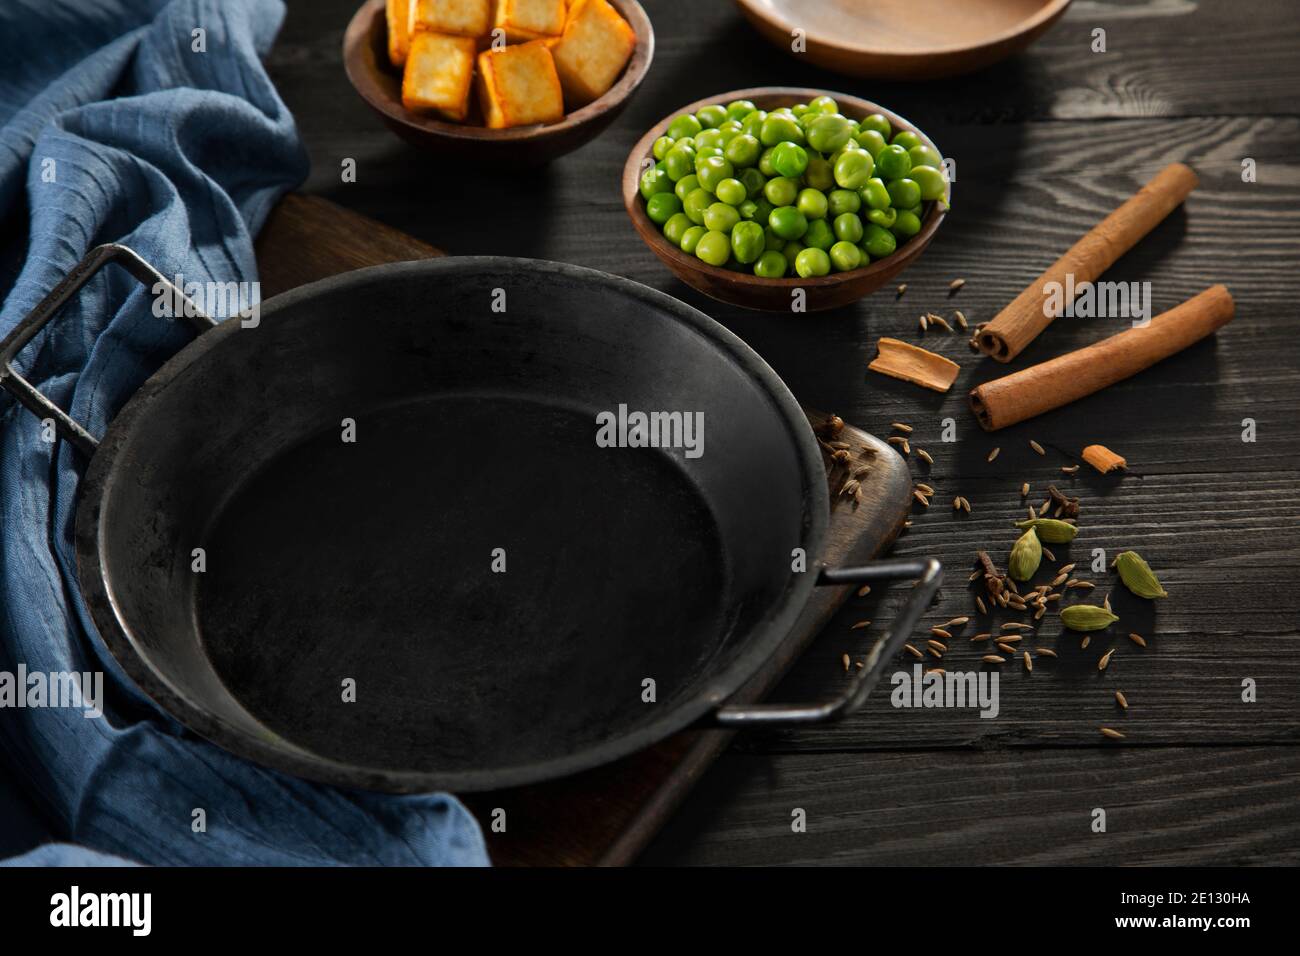 Empty pan next to peas and cottage cheese. Stock Photo